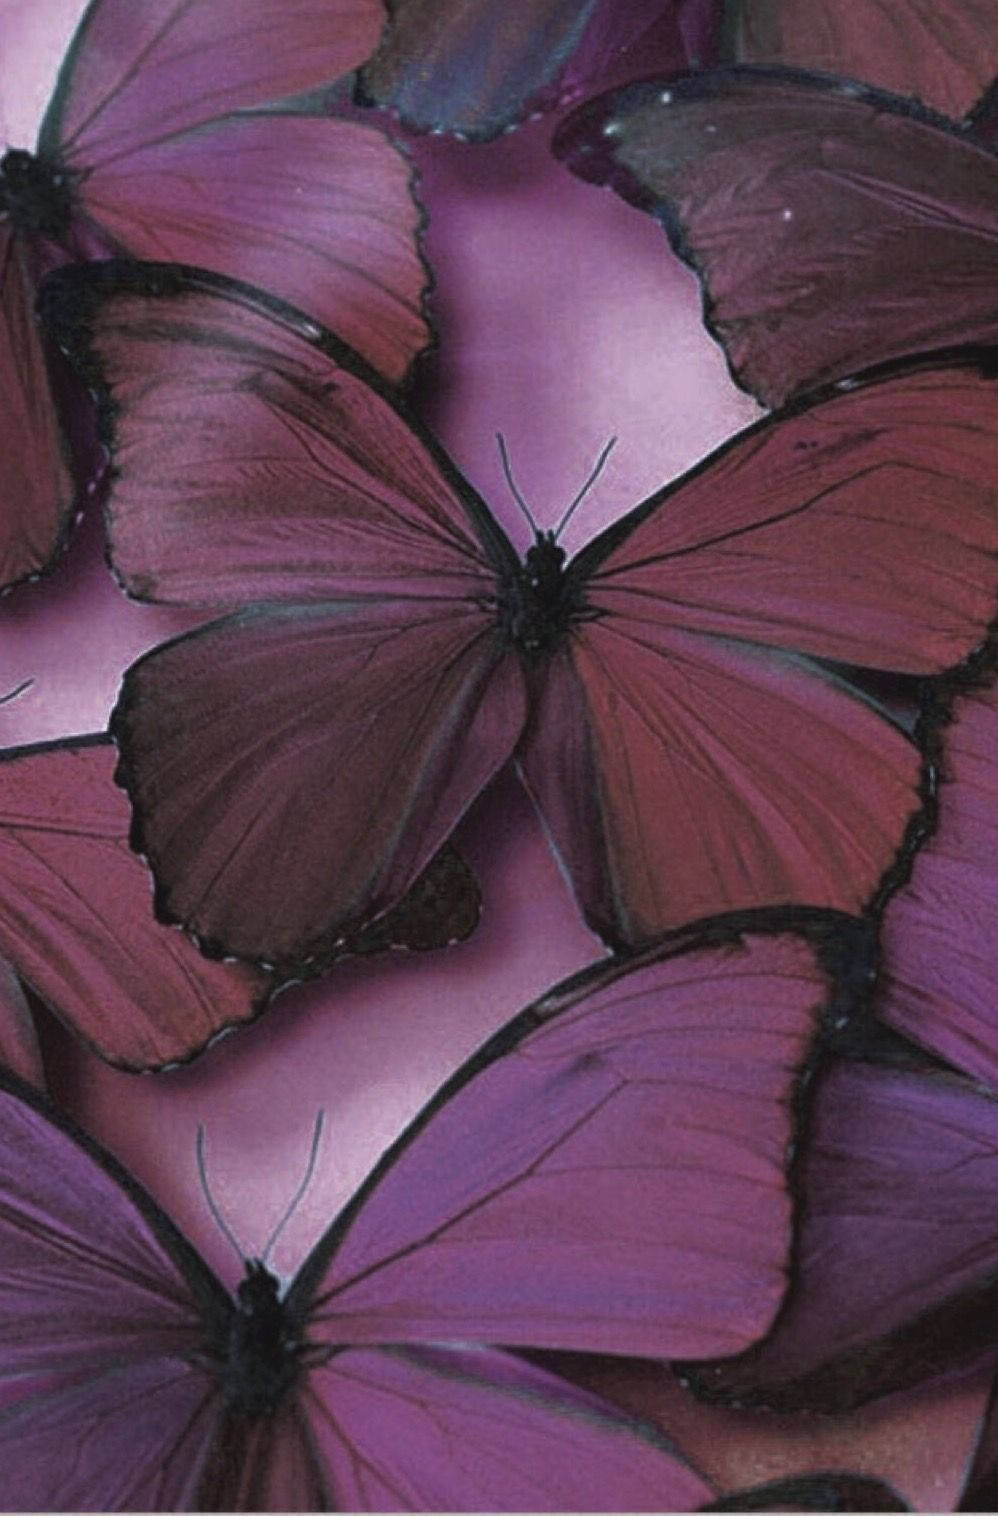 Wallpaperfor Those Who Love Nature And Butterflies, This Mauve, Plum And Purple Butterfly Phone Wallpaper Will Add A Touch Of Beauty And Serenity To Your Device Screen. Fondo de pantalla